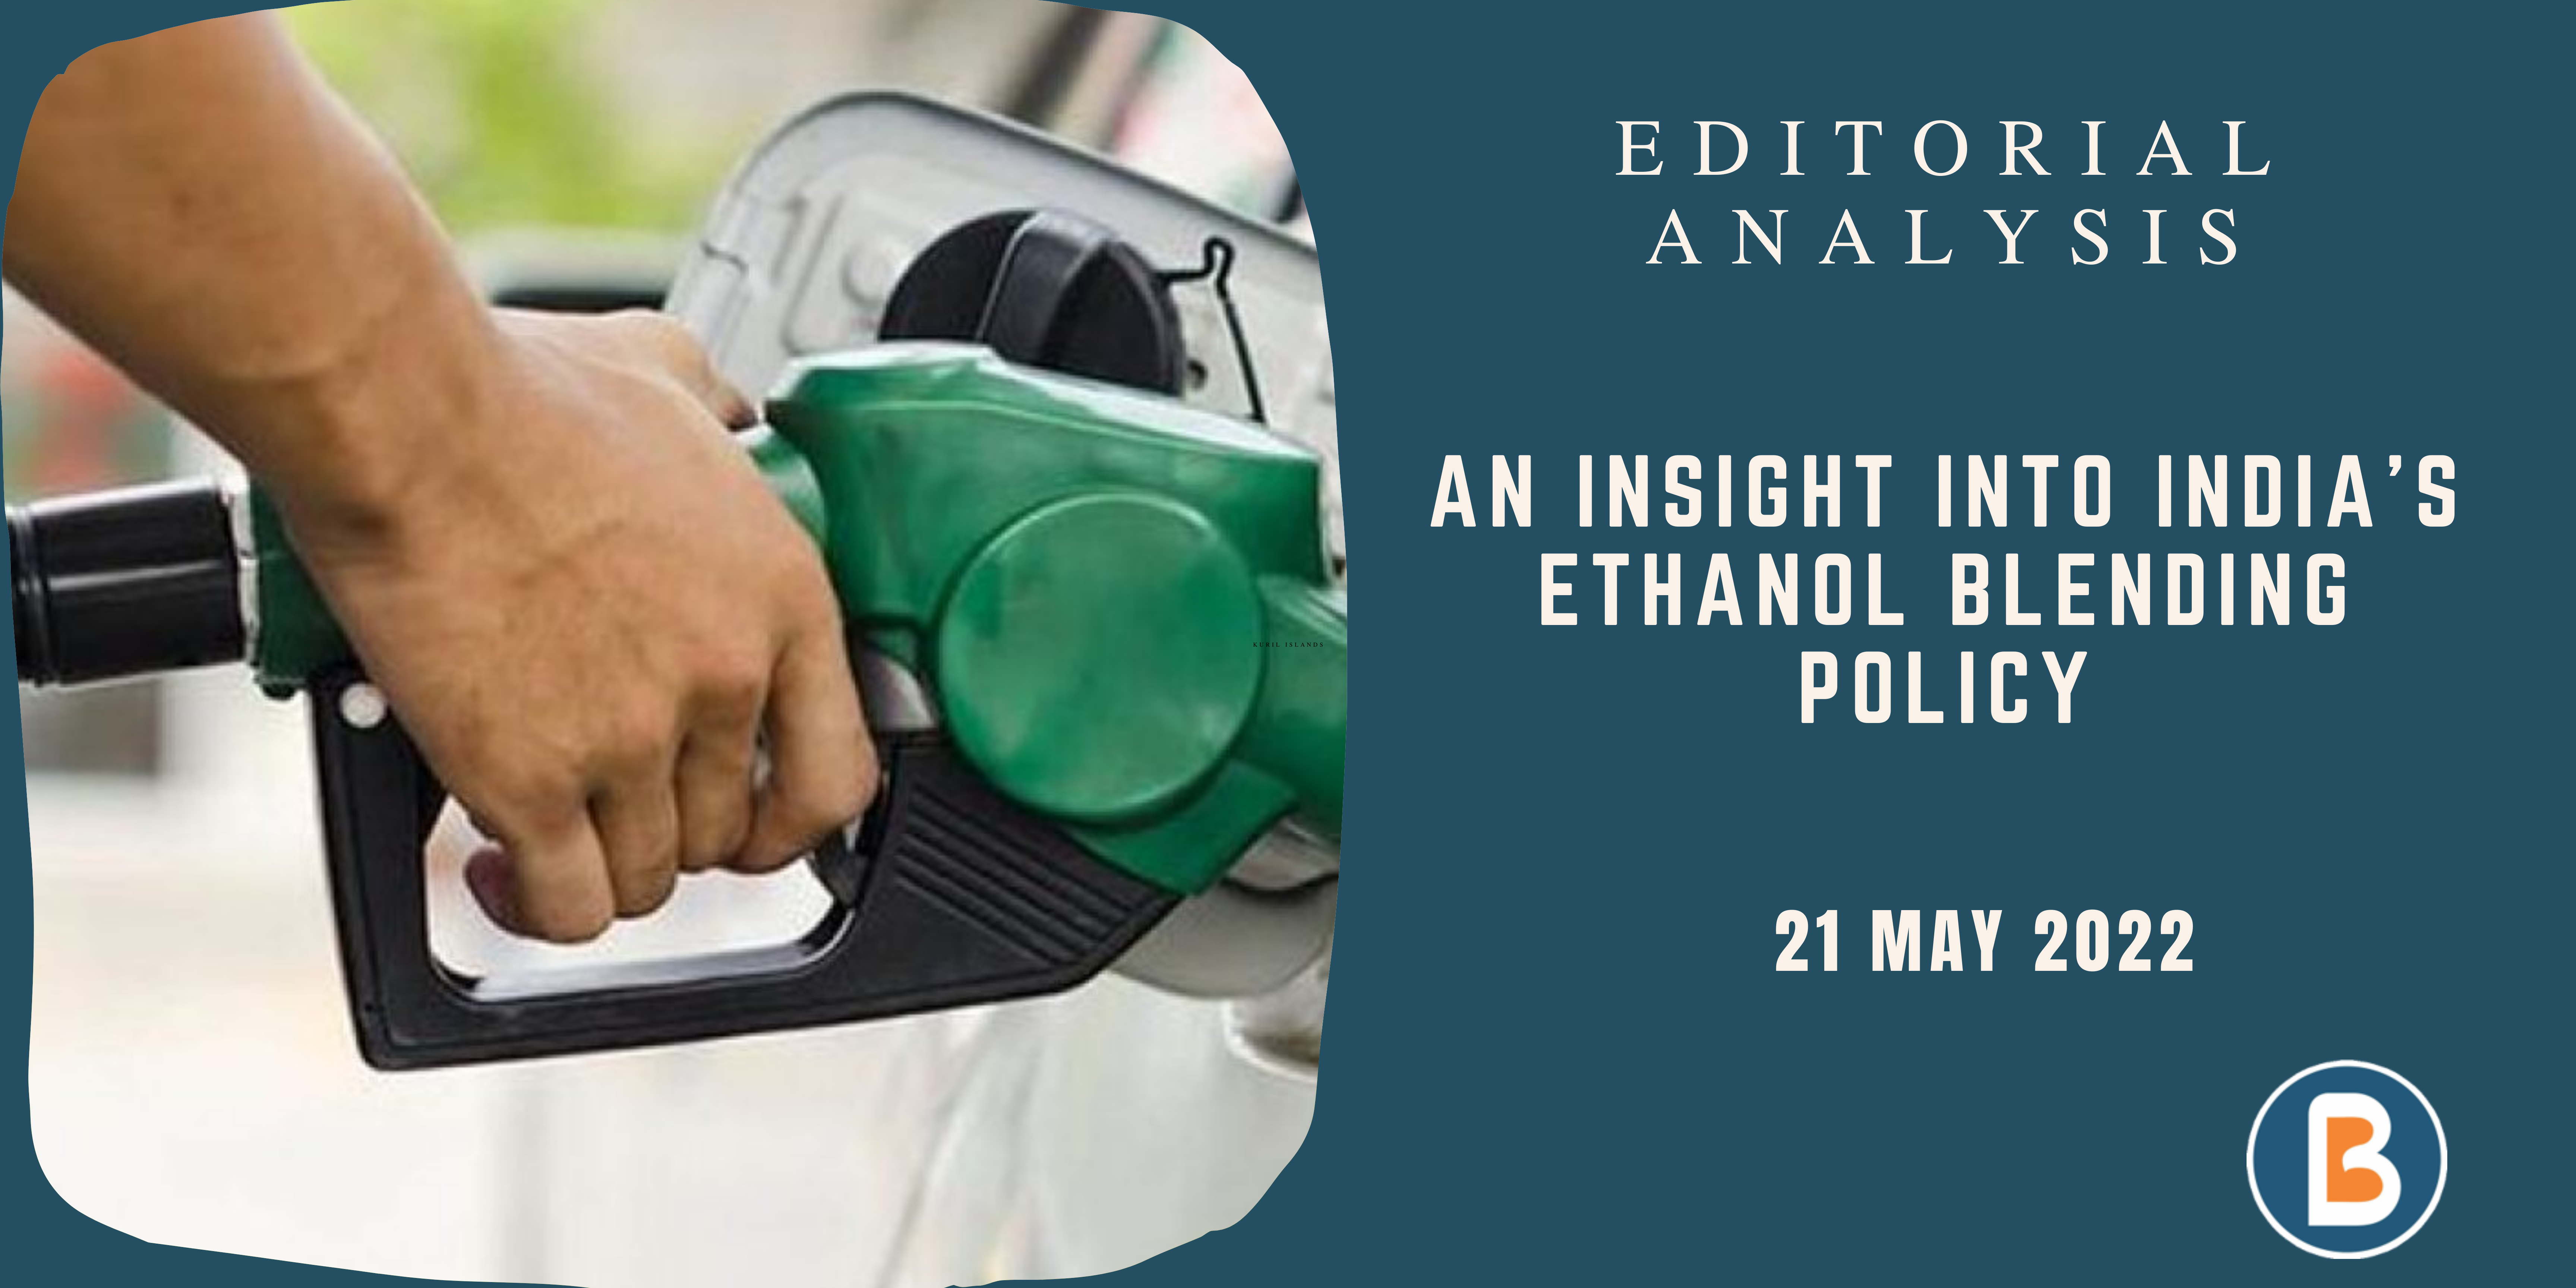 Editorial Analysis for UPSC - An Insight into India's Ethanol blending policy